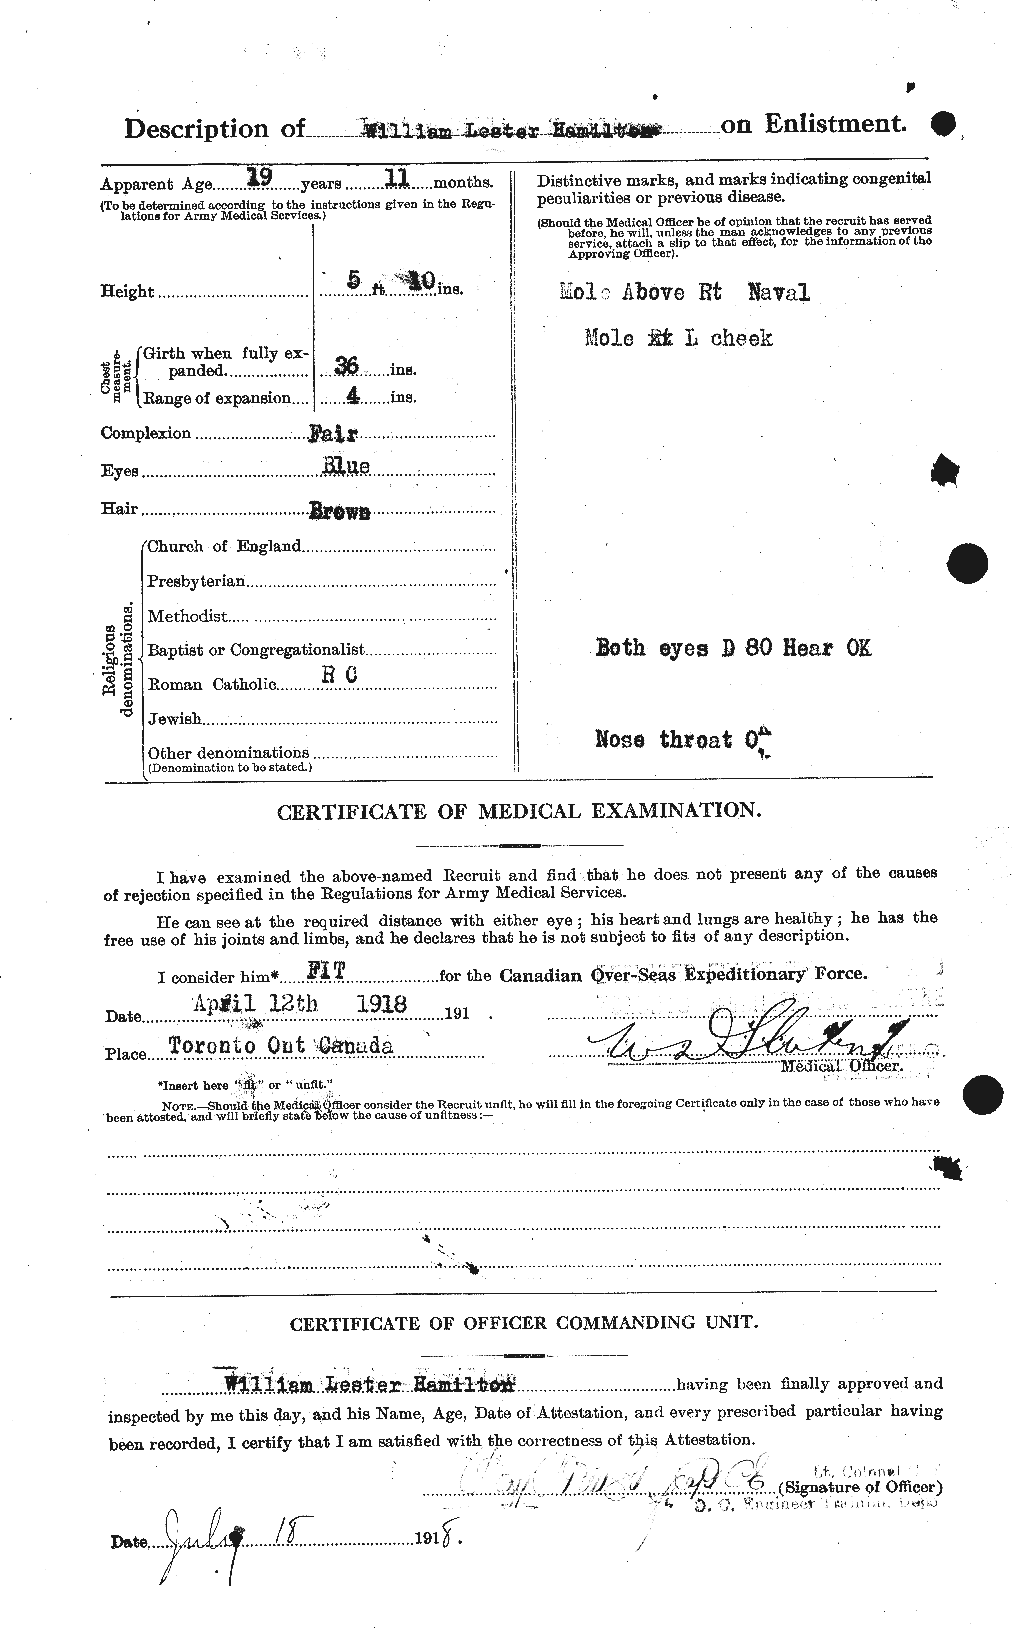 Personnel Records of the First World War - CEF 374914b